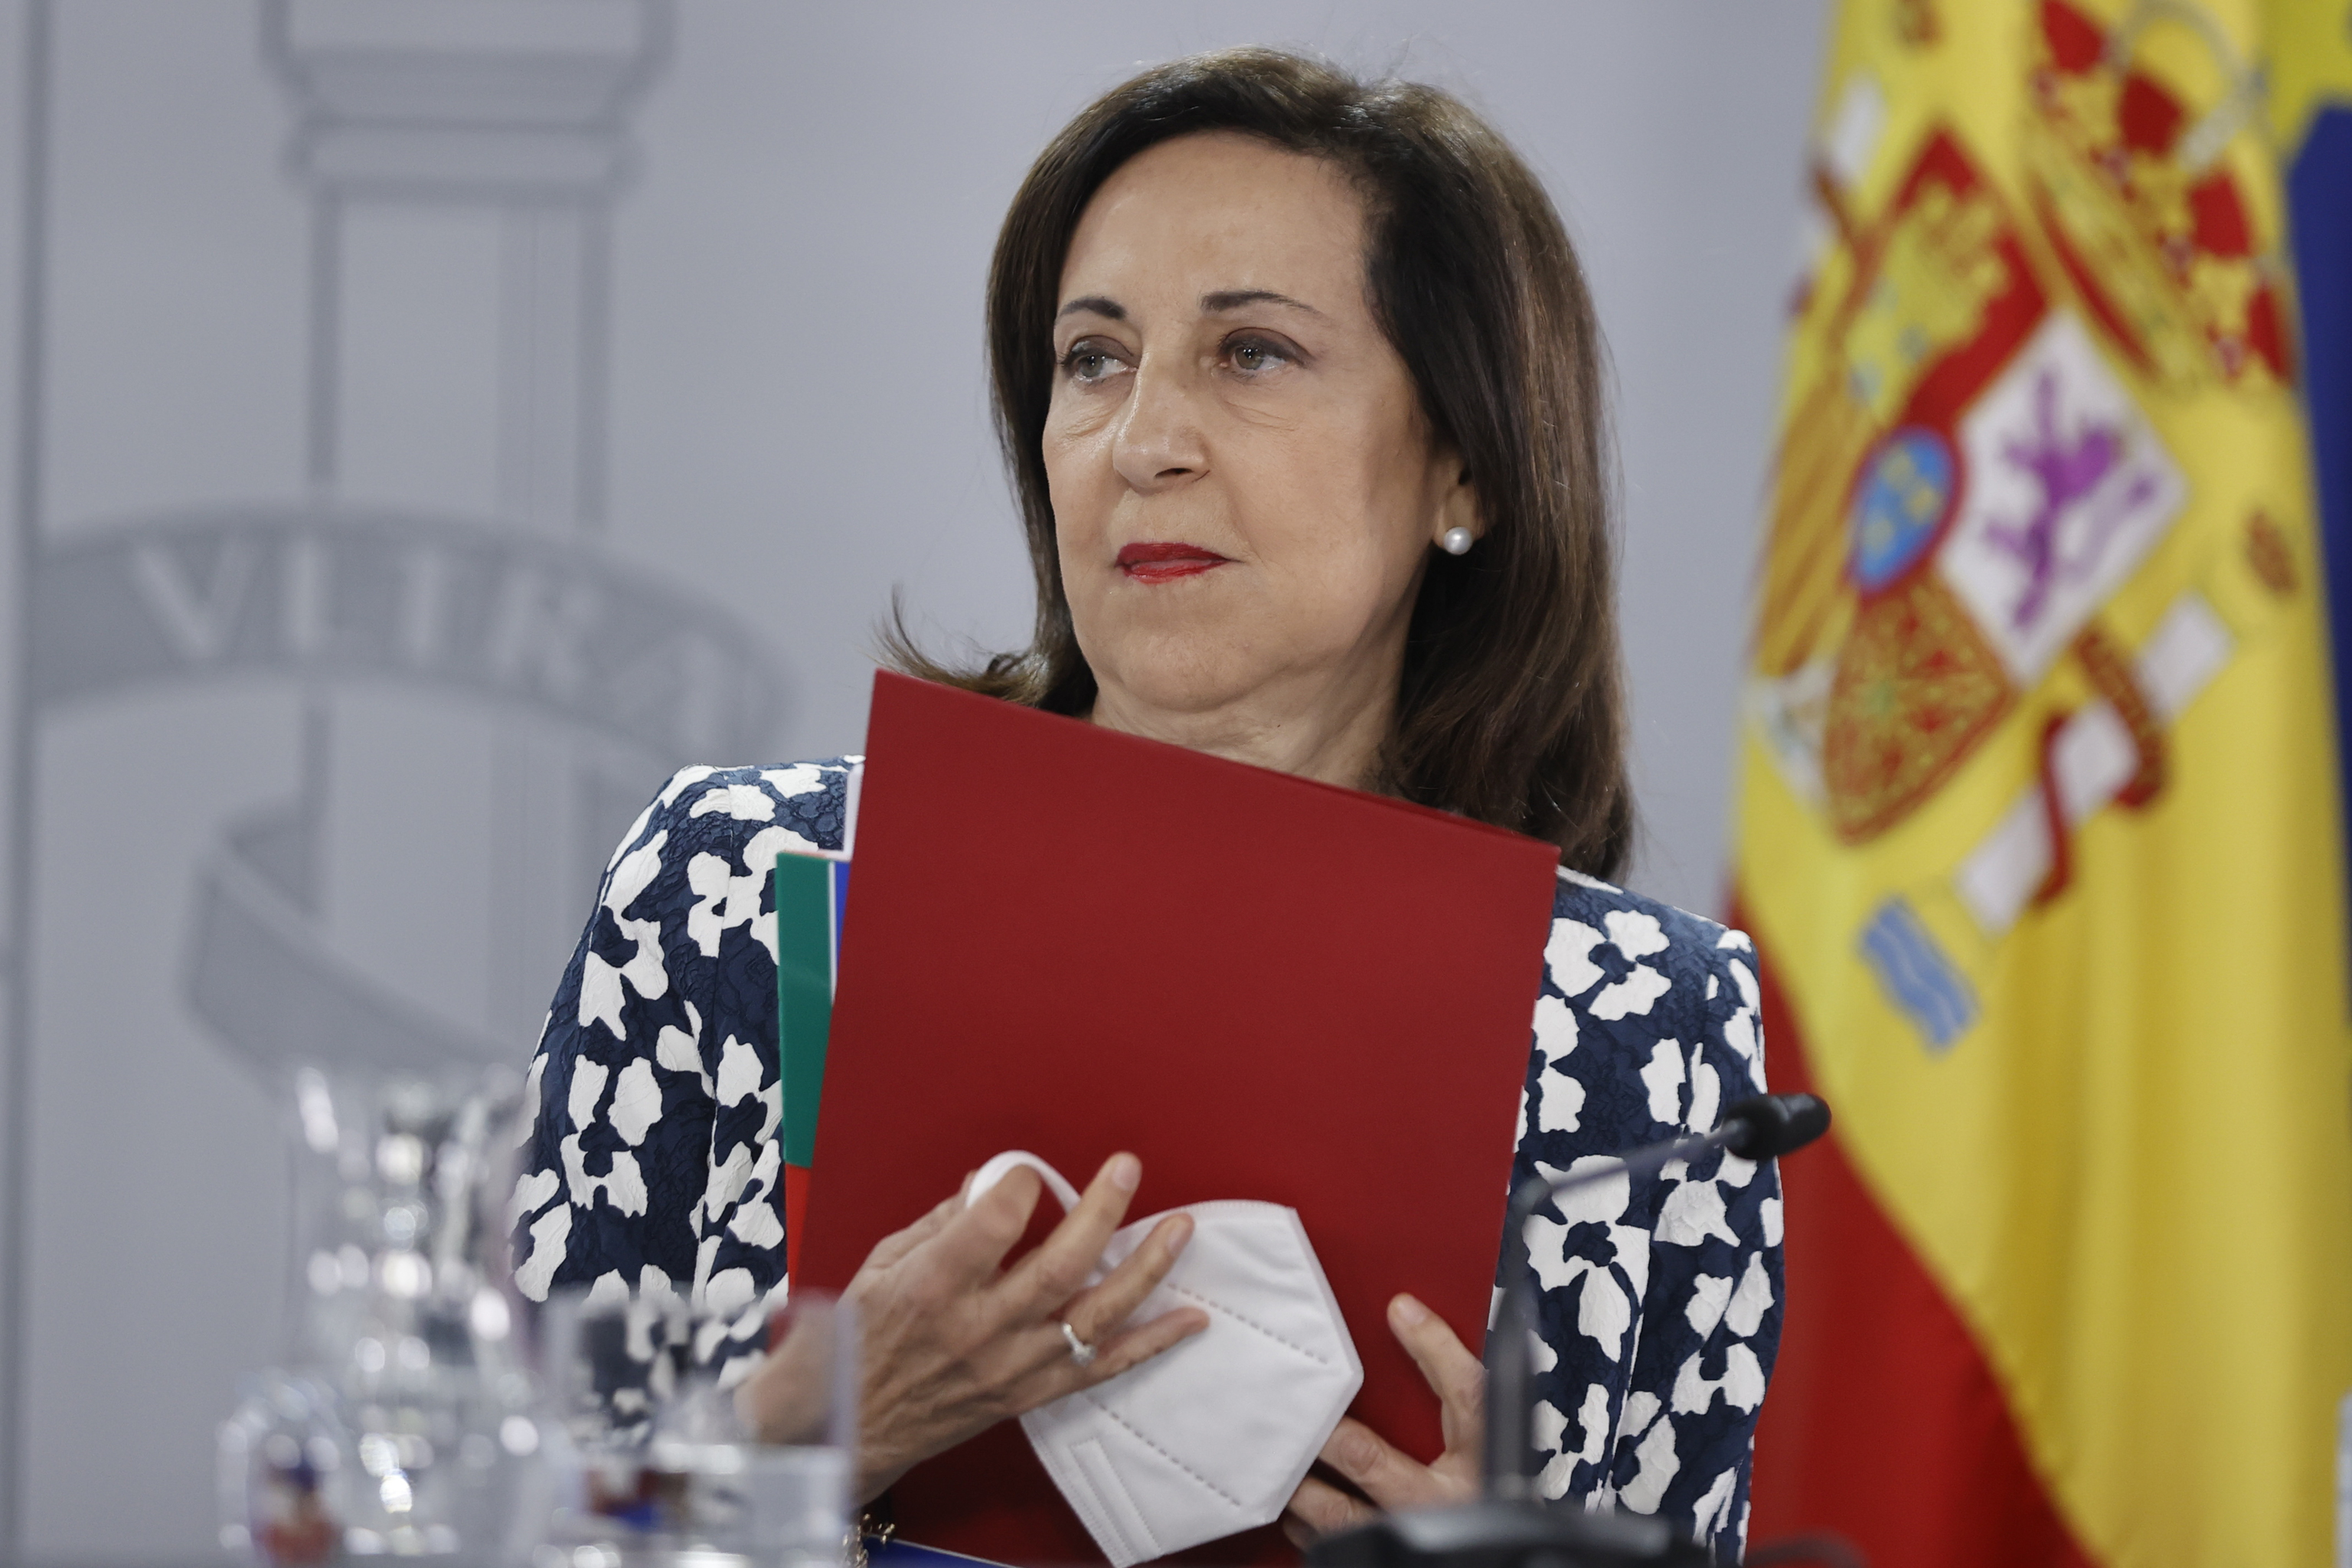 The Defense Minister, Margarita Robles, appears after learning of the change in CNI.